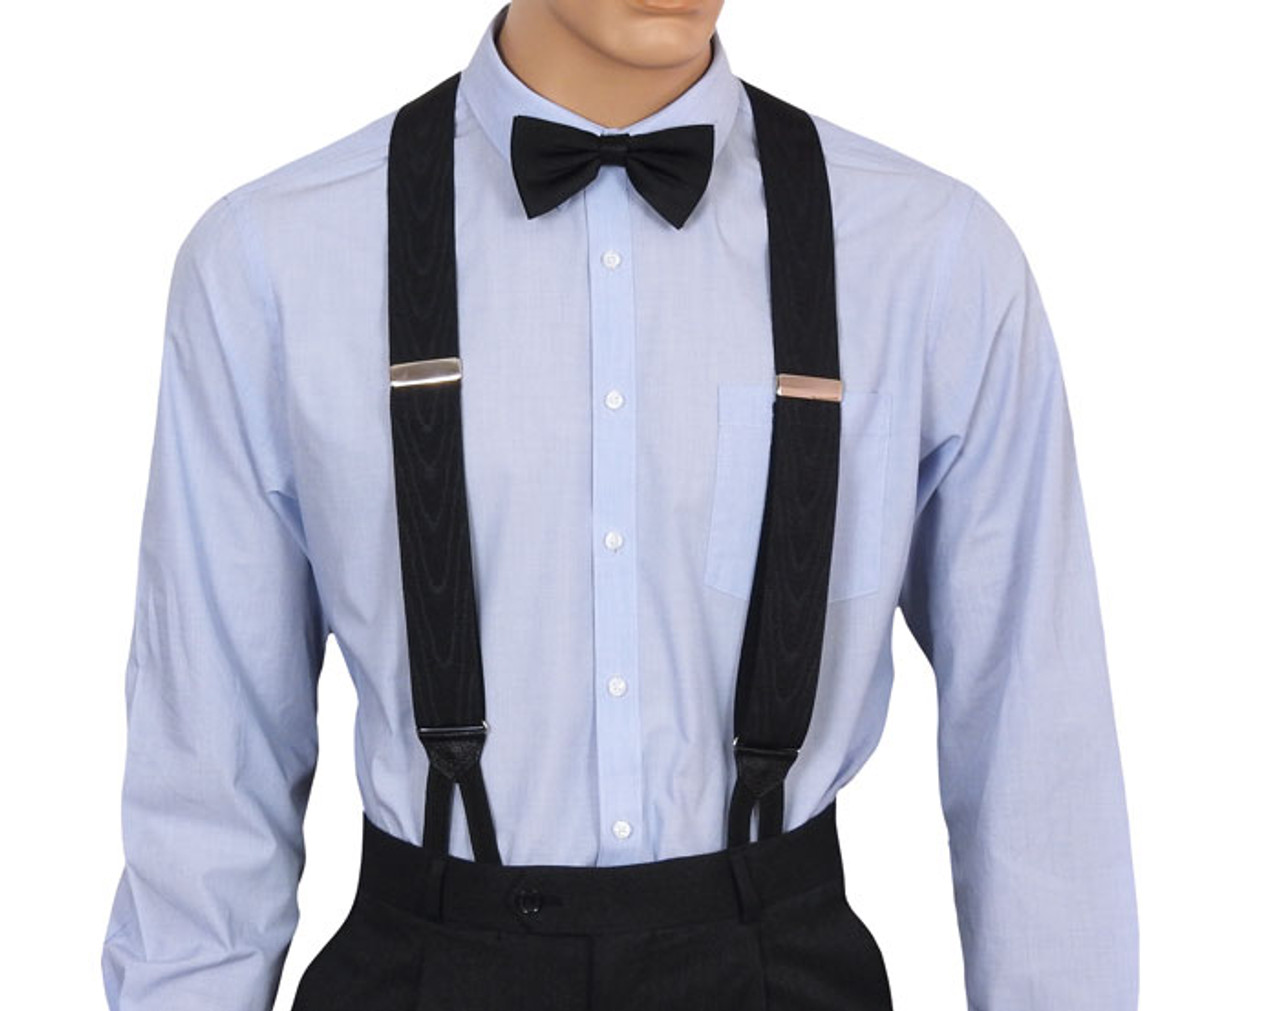 Black Moire Silk Suspenders - Button Only